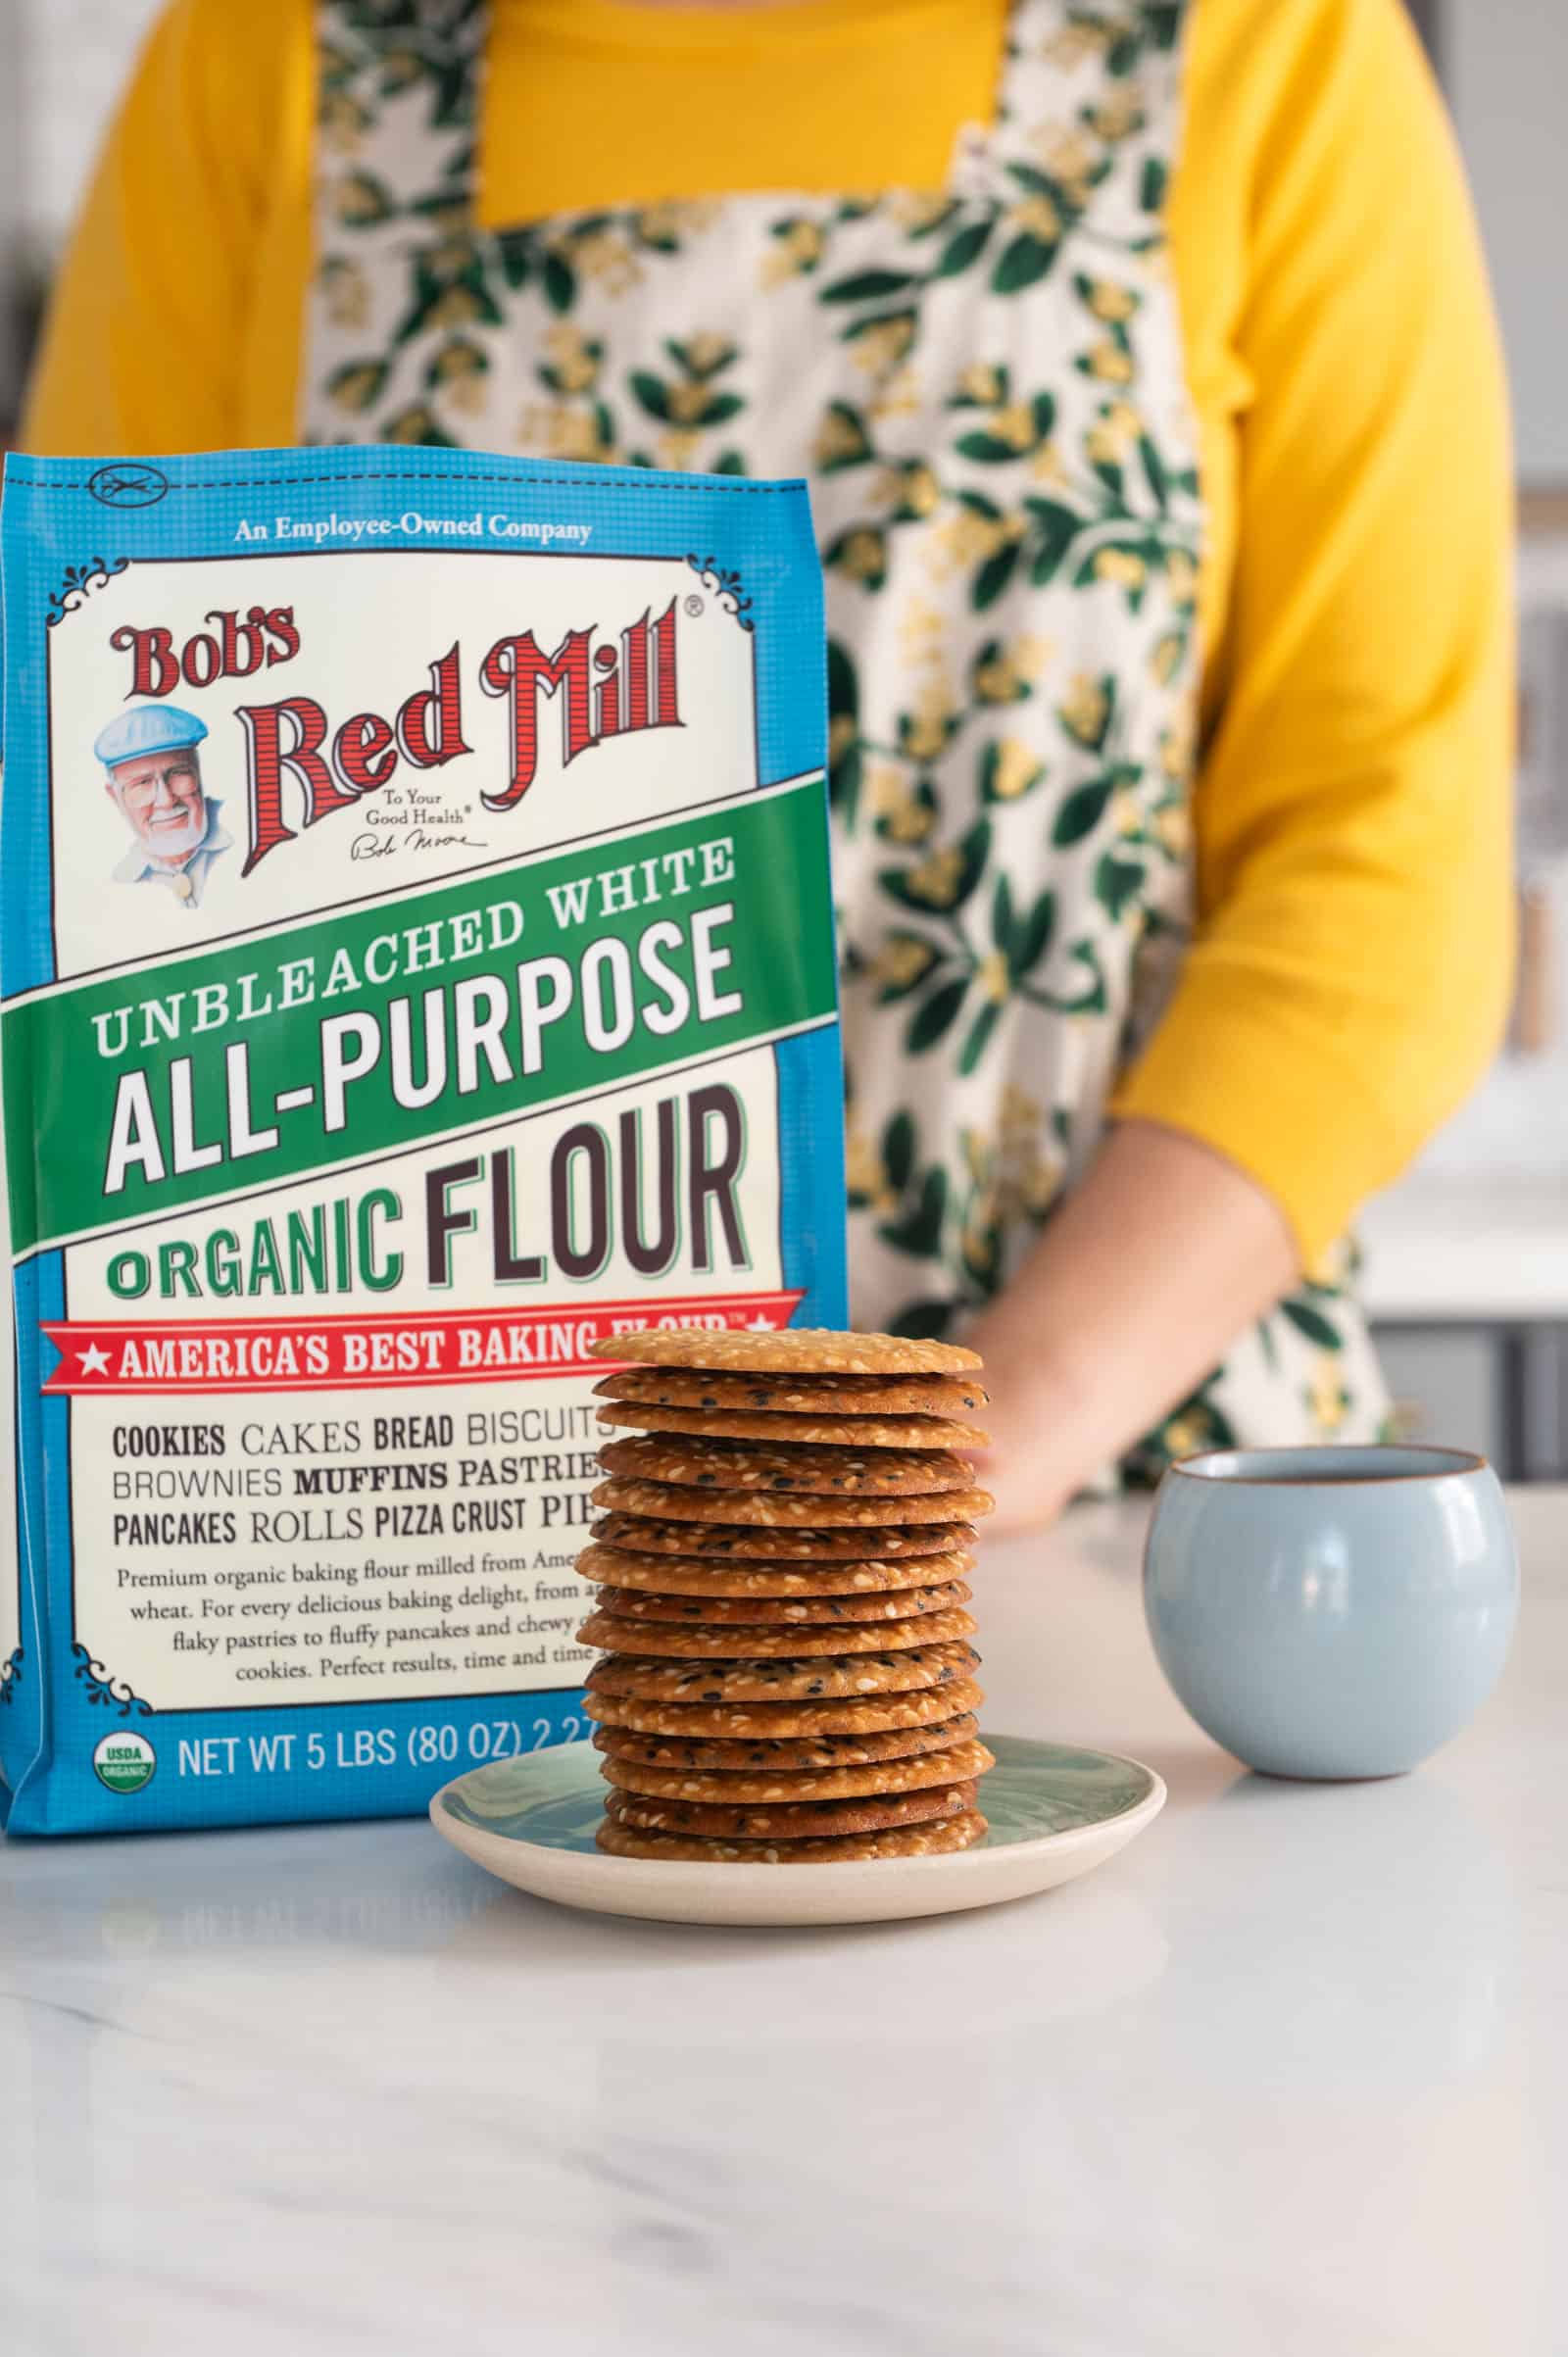 Cookies with Bob's Red Mill all-purpose flour